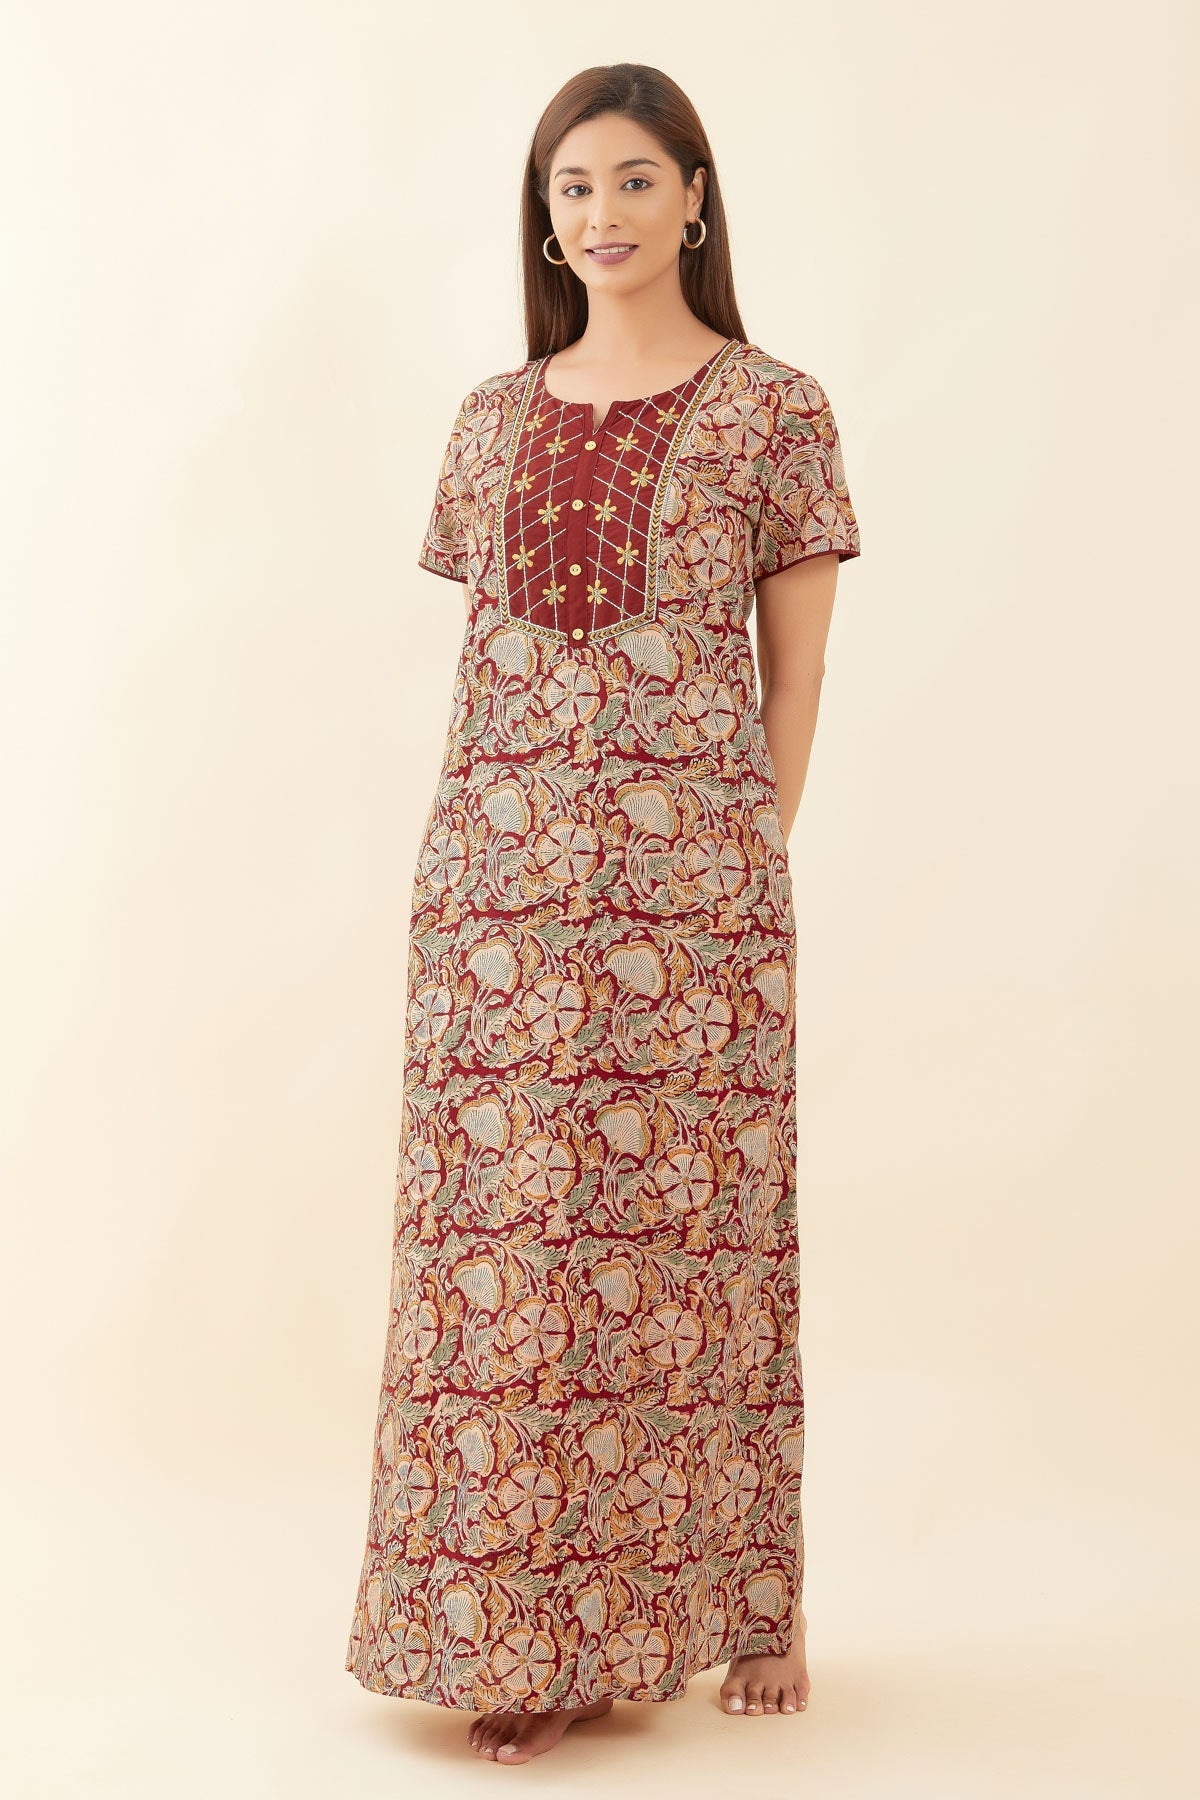 All Over Kalamkari Printed With Floral Embroidered Yoke Nighty - Red